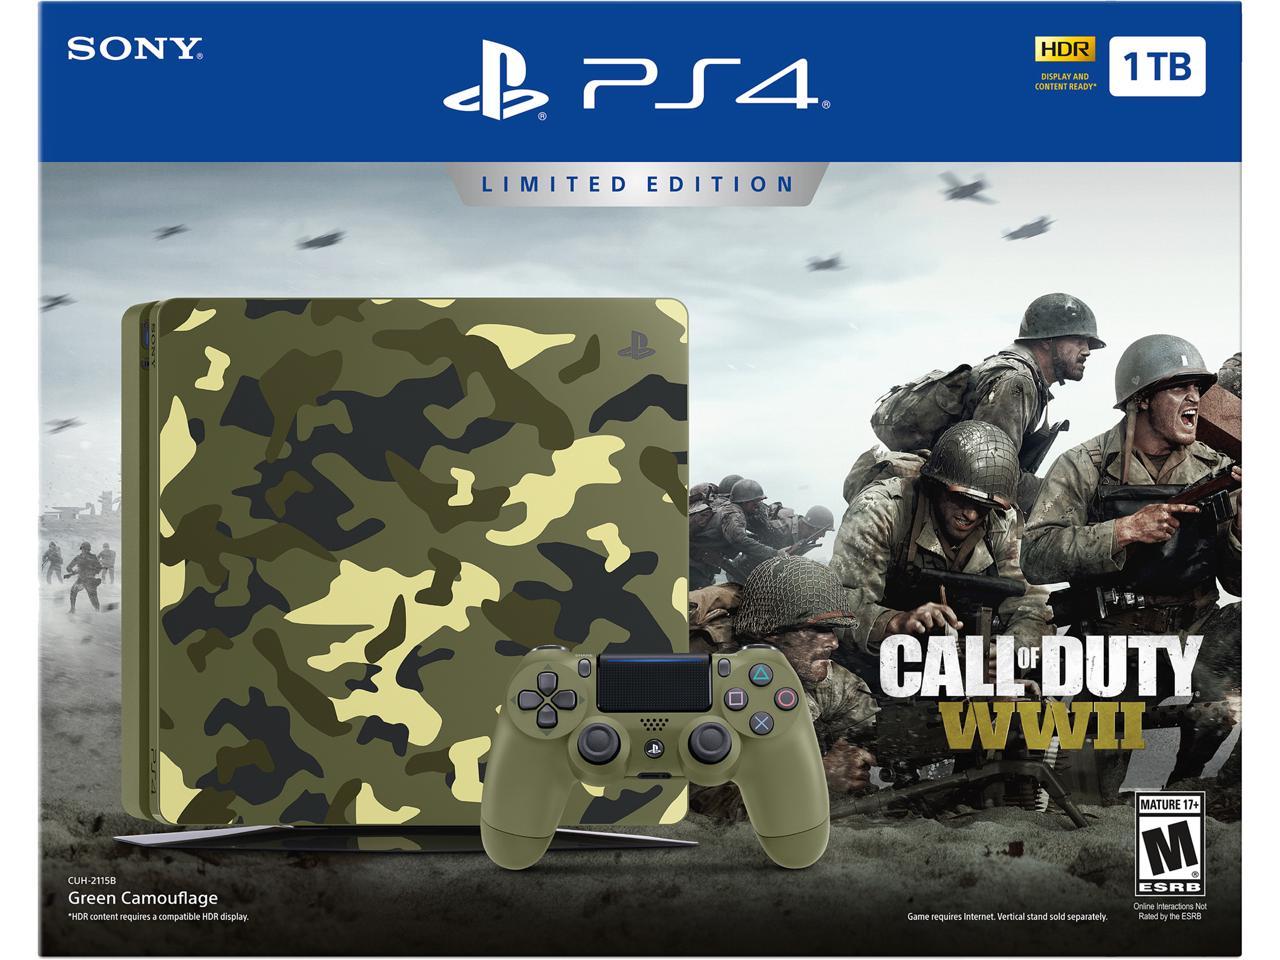 PlayStation 4 Slim 1TB Console - Call of Duty WWII Limited Edition 